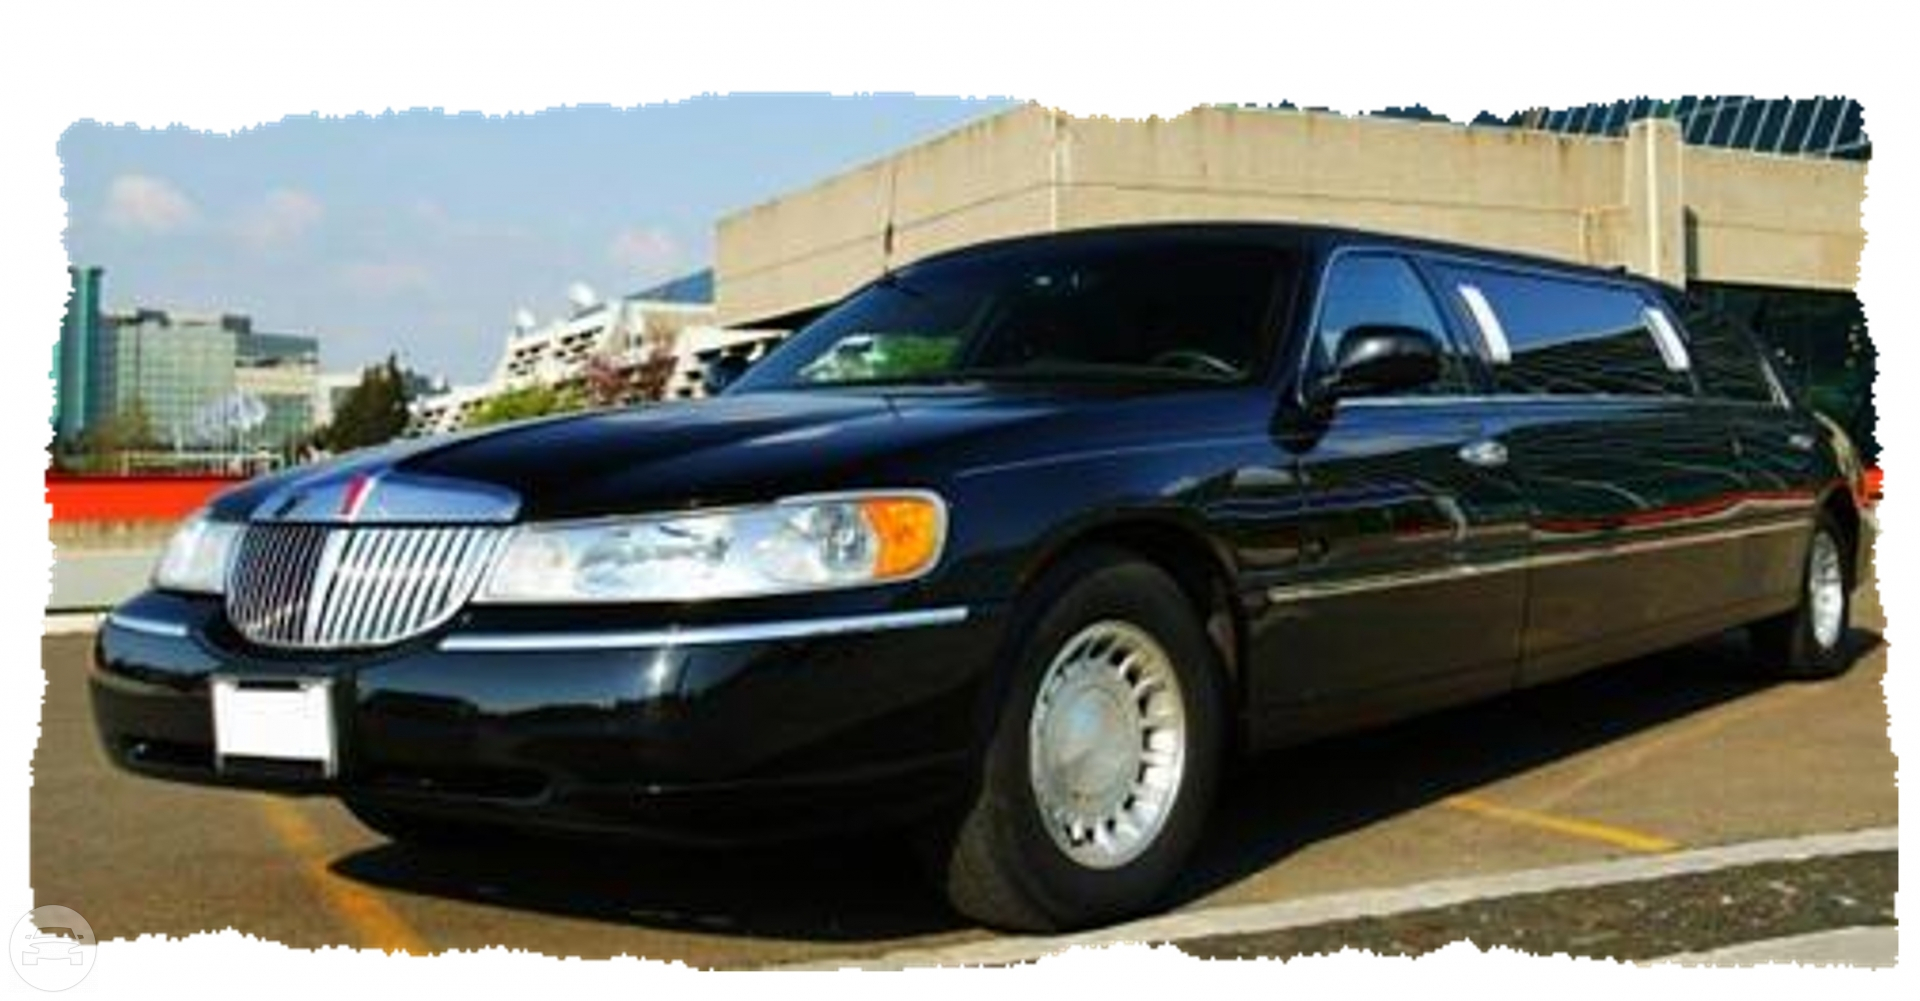 EIGHT PASSENGER LINCOLN STRETCH LIMOUSINE
Limo /
Dallas, TX

 / Hourly $0.00
